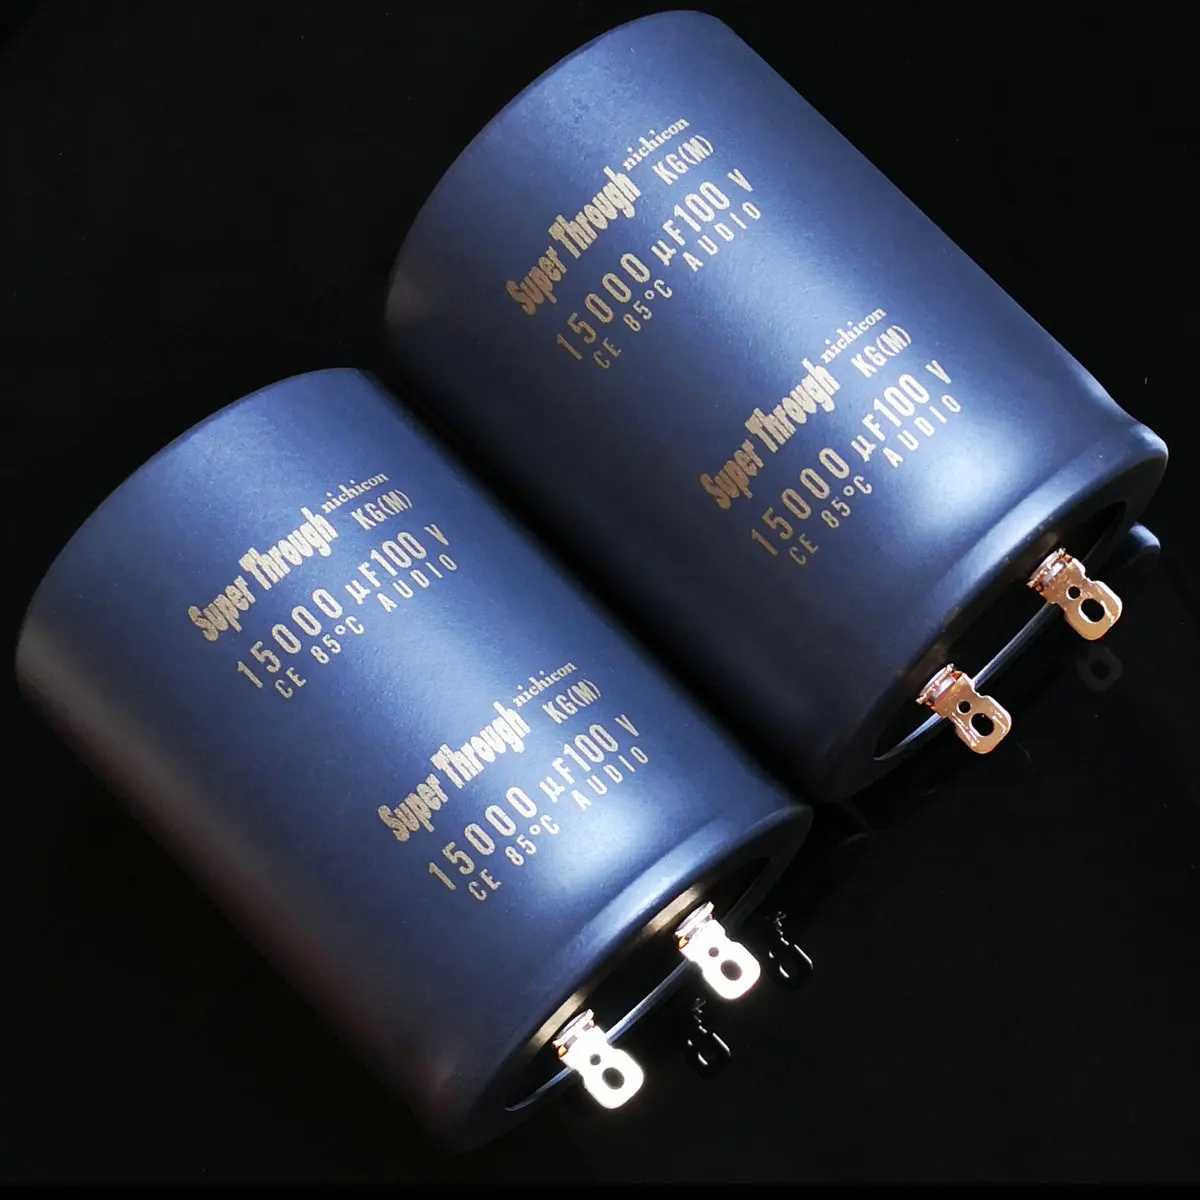 2pcs/lot Japan nichicon 100V 15000UF KG Super Through 76X100mm gold foot audio aluminum electrolytic capacitor free shipping 2pcs 2200uf 35v nichicon 22x45mm kg super through pitch 10mm 35v 2200uf electrolytic capacitors gold plated copper feet